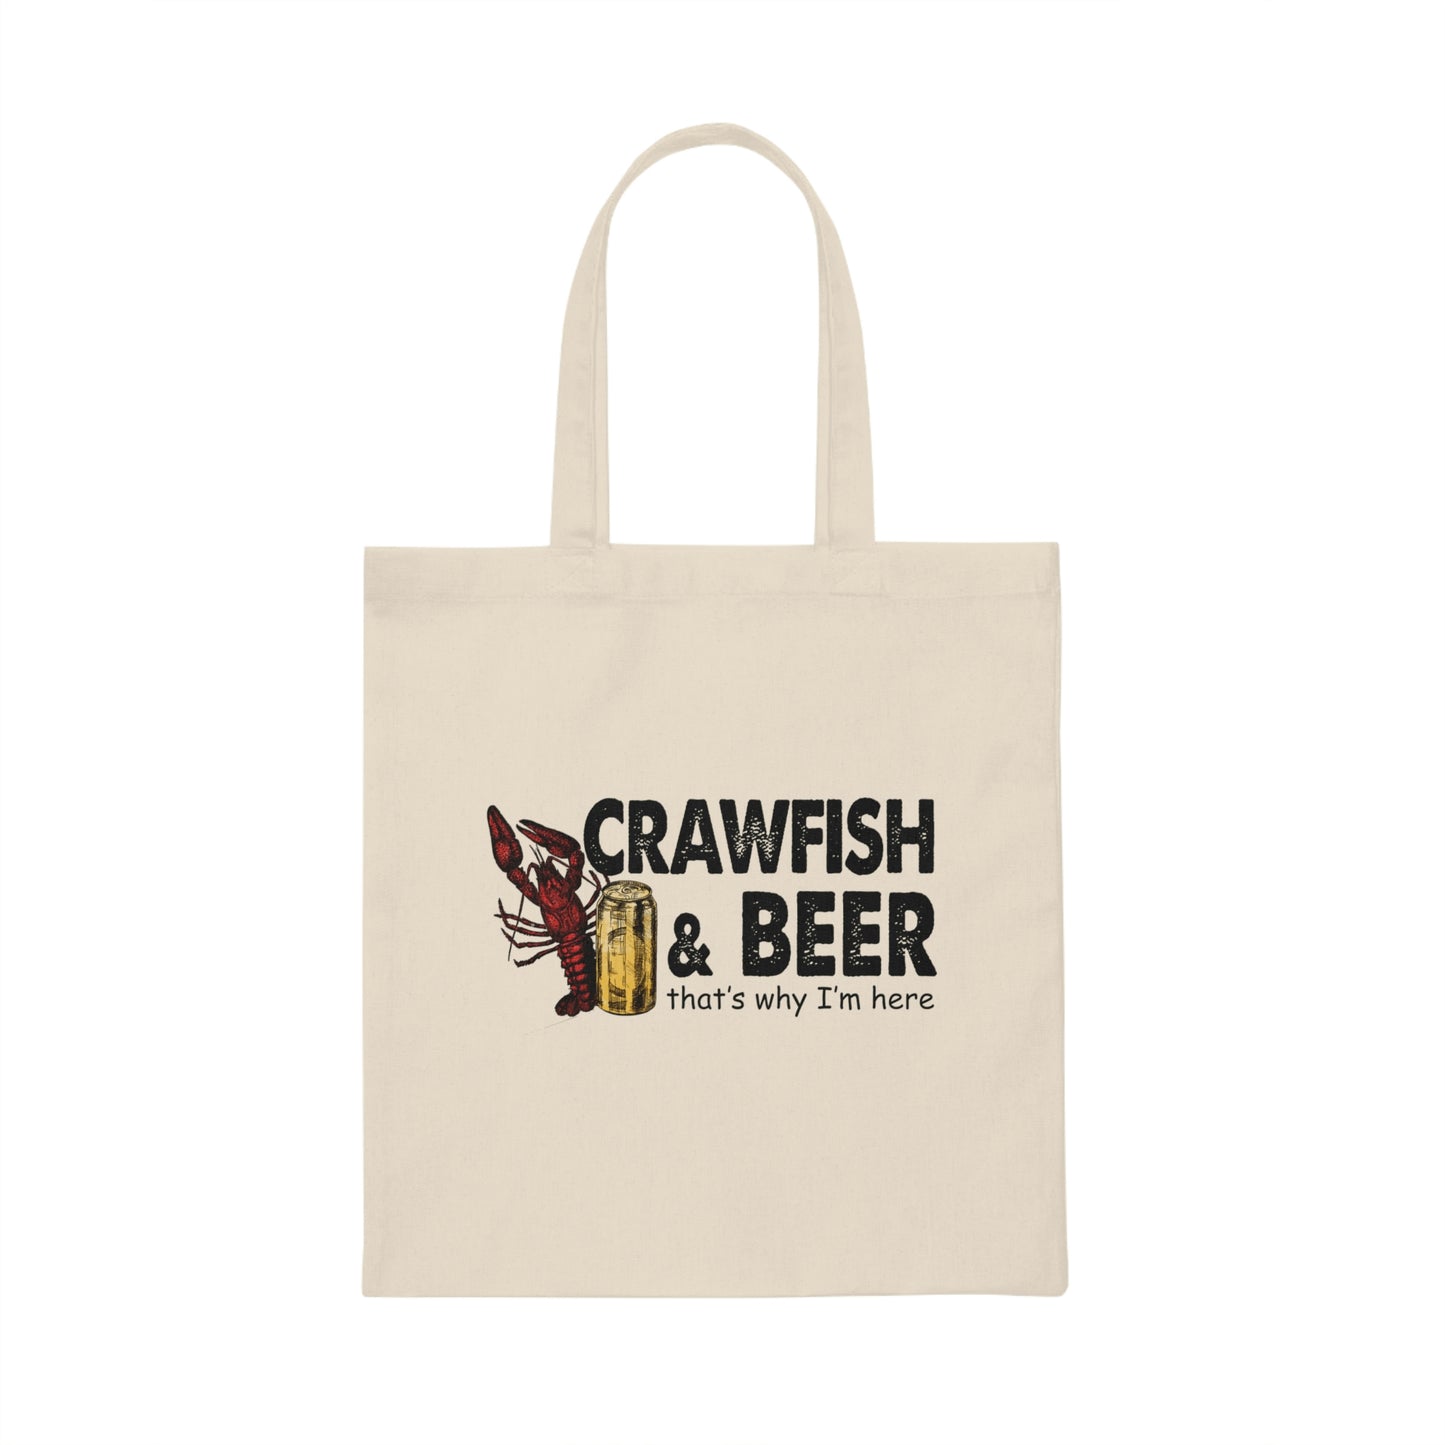 Crawfish and Beer That's Why I'm Here Tote Bag